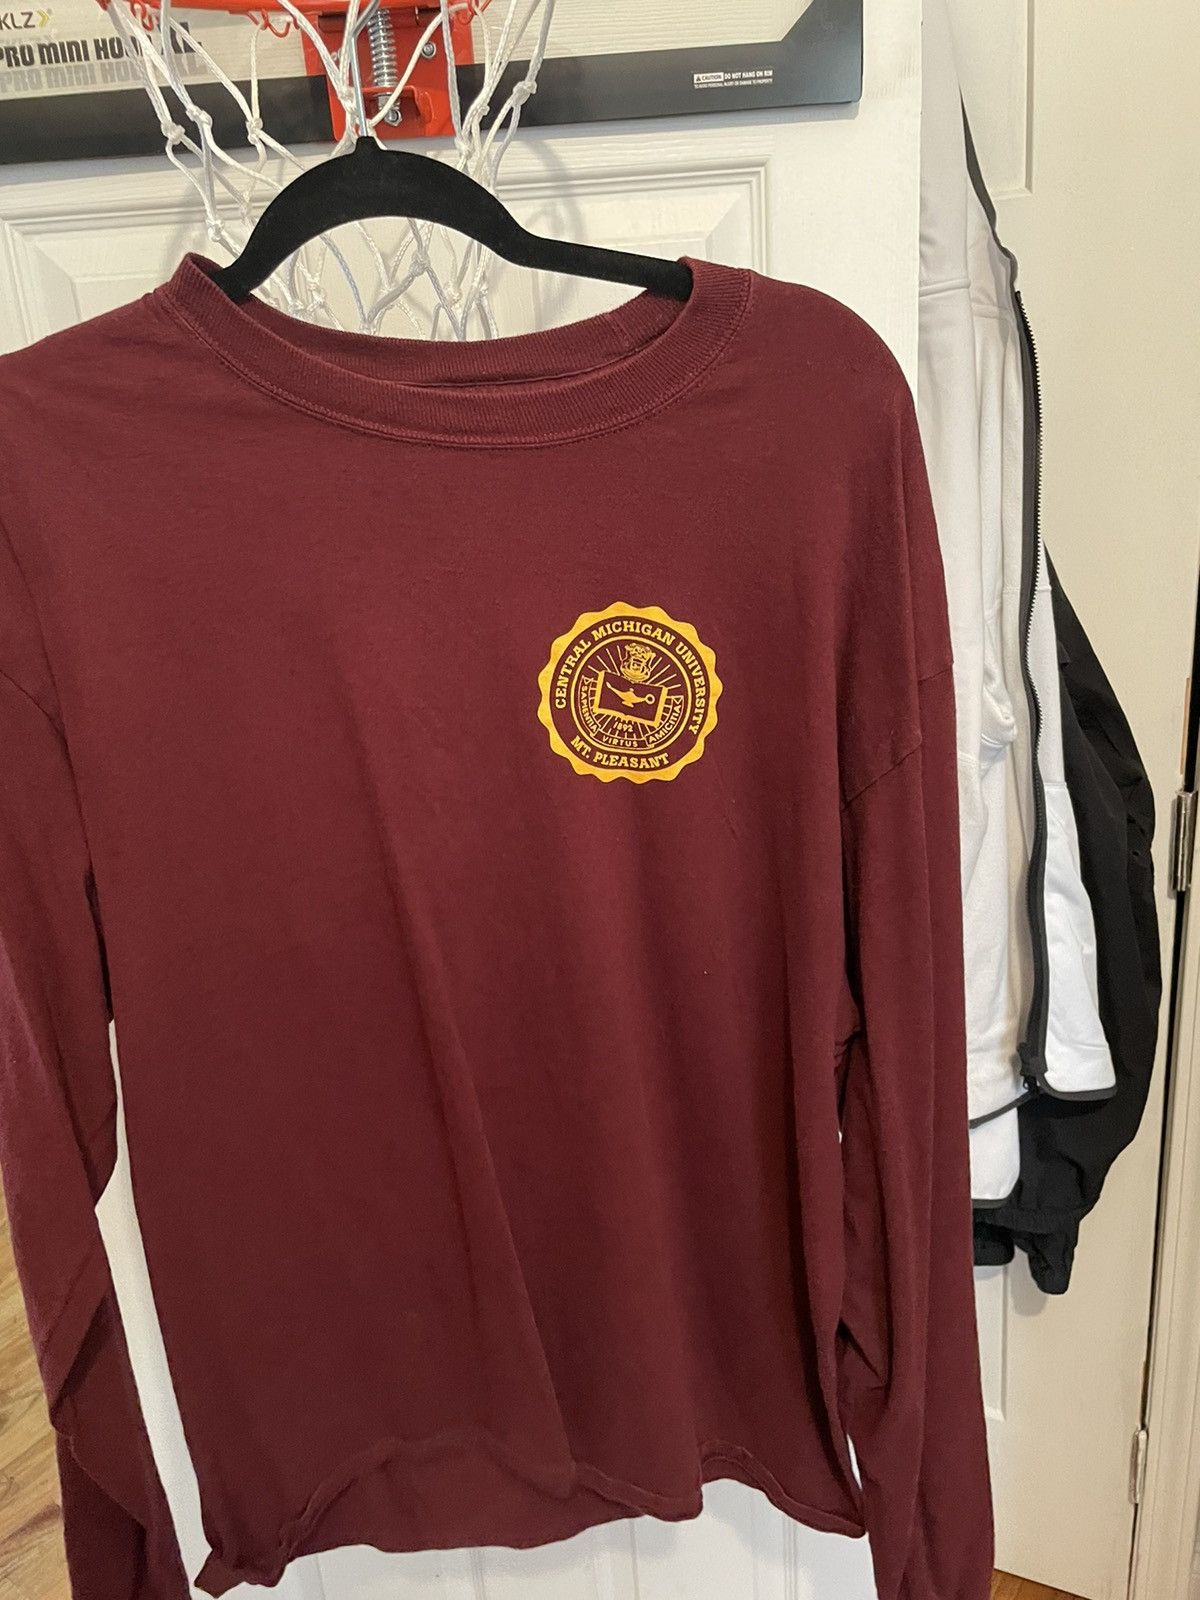 Vintage Central Michigan University 125th anniversary LS Tee Size US XL / EU 56 / 4 - 1 Preview